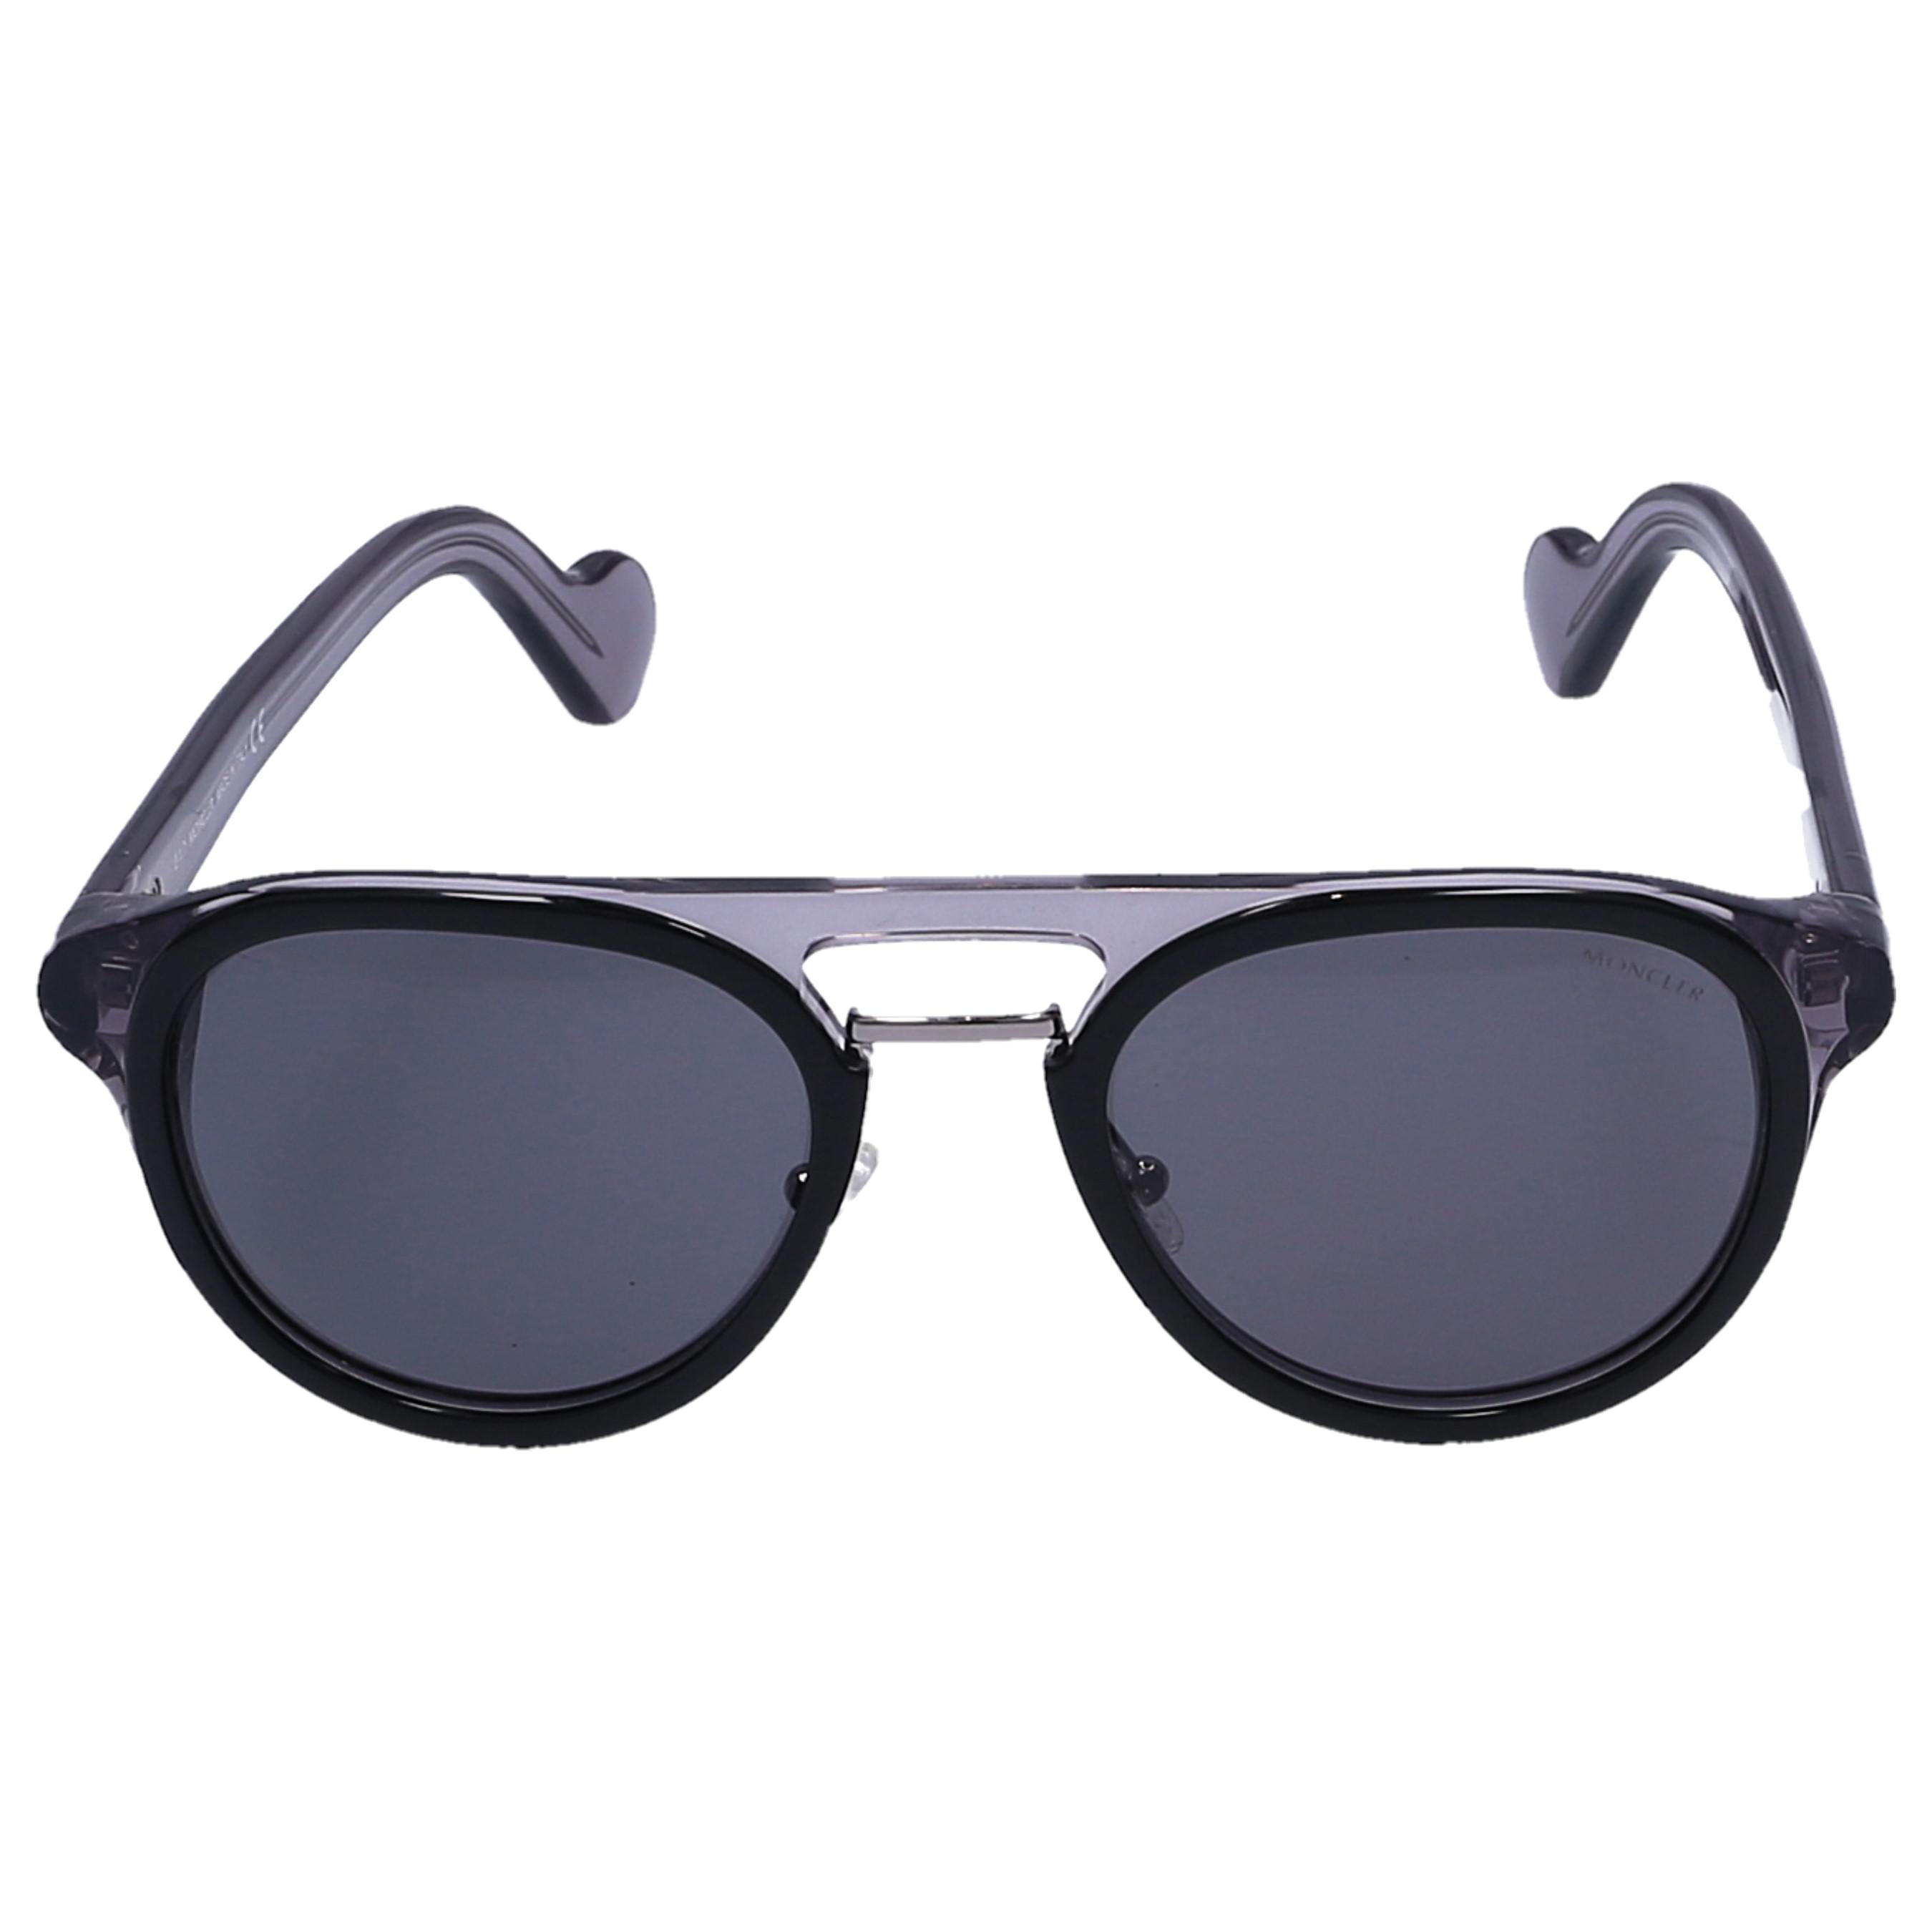 Moncler Sunglasses Aviator 0020 05a Acetate Grey in Gray - Lyst